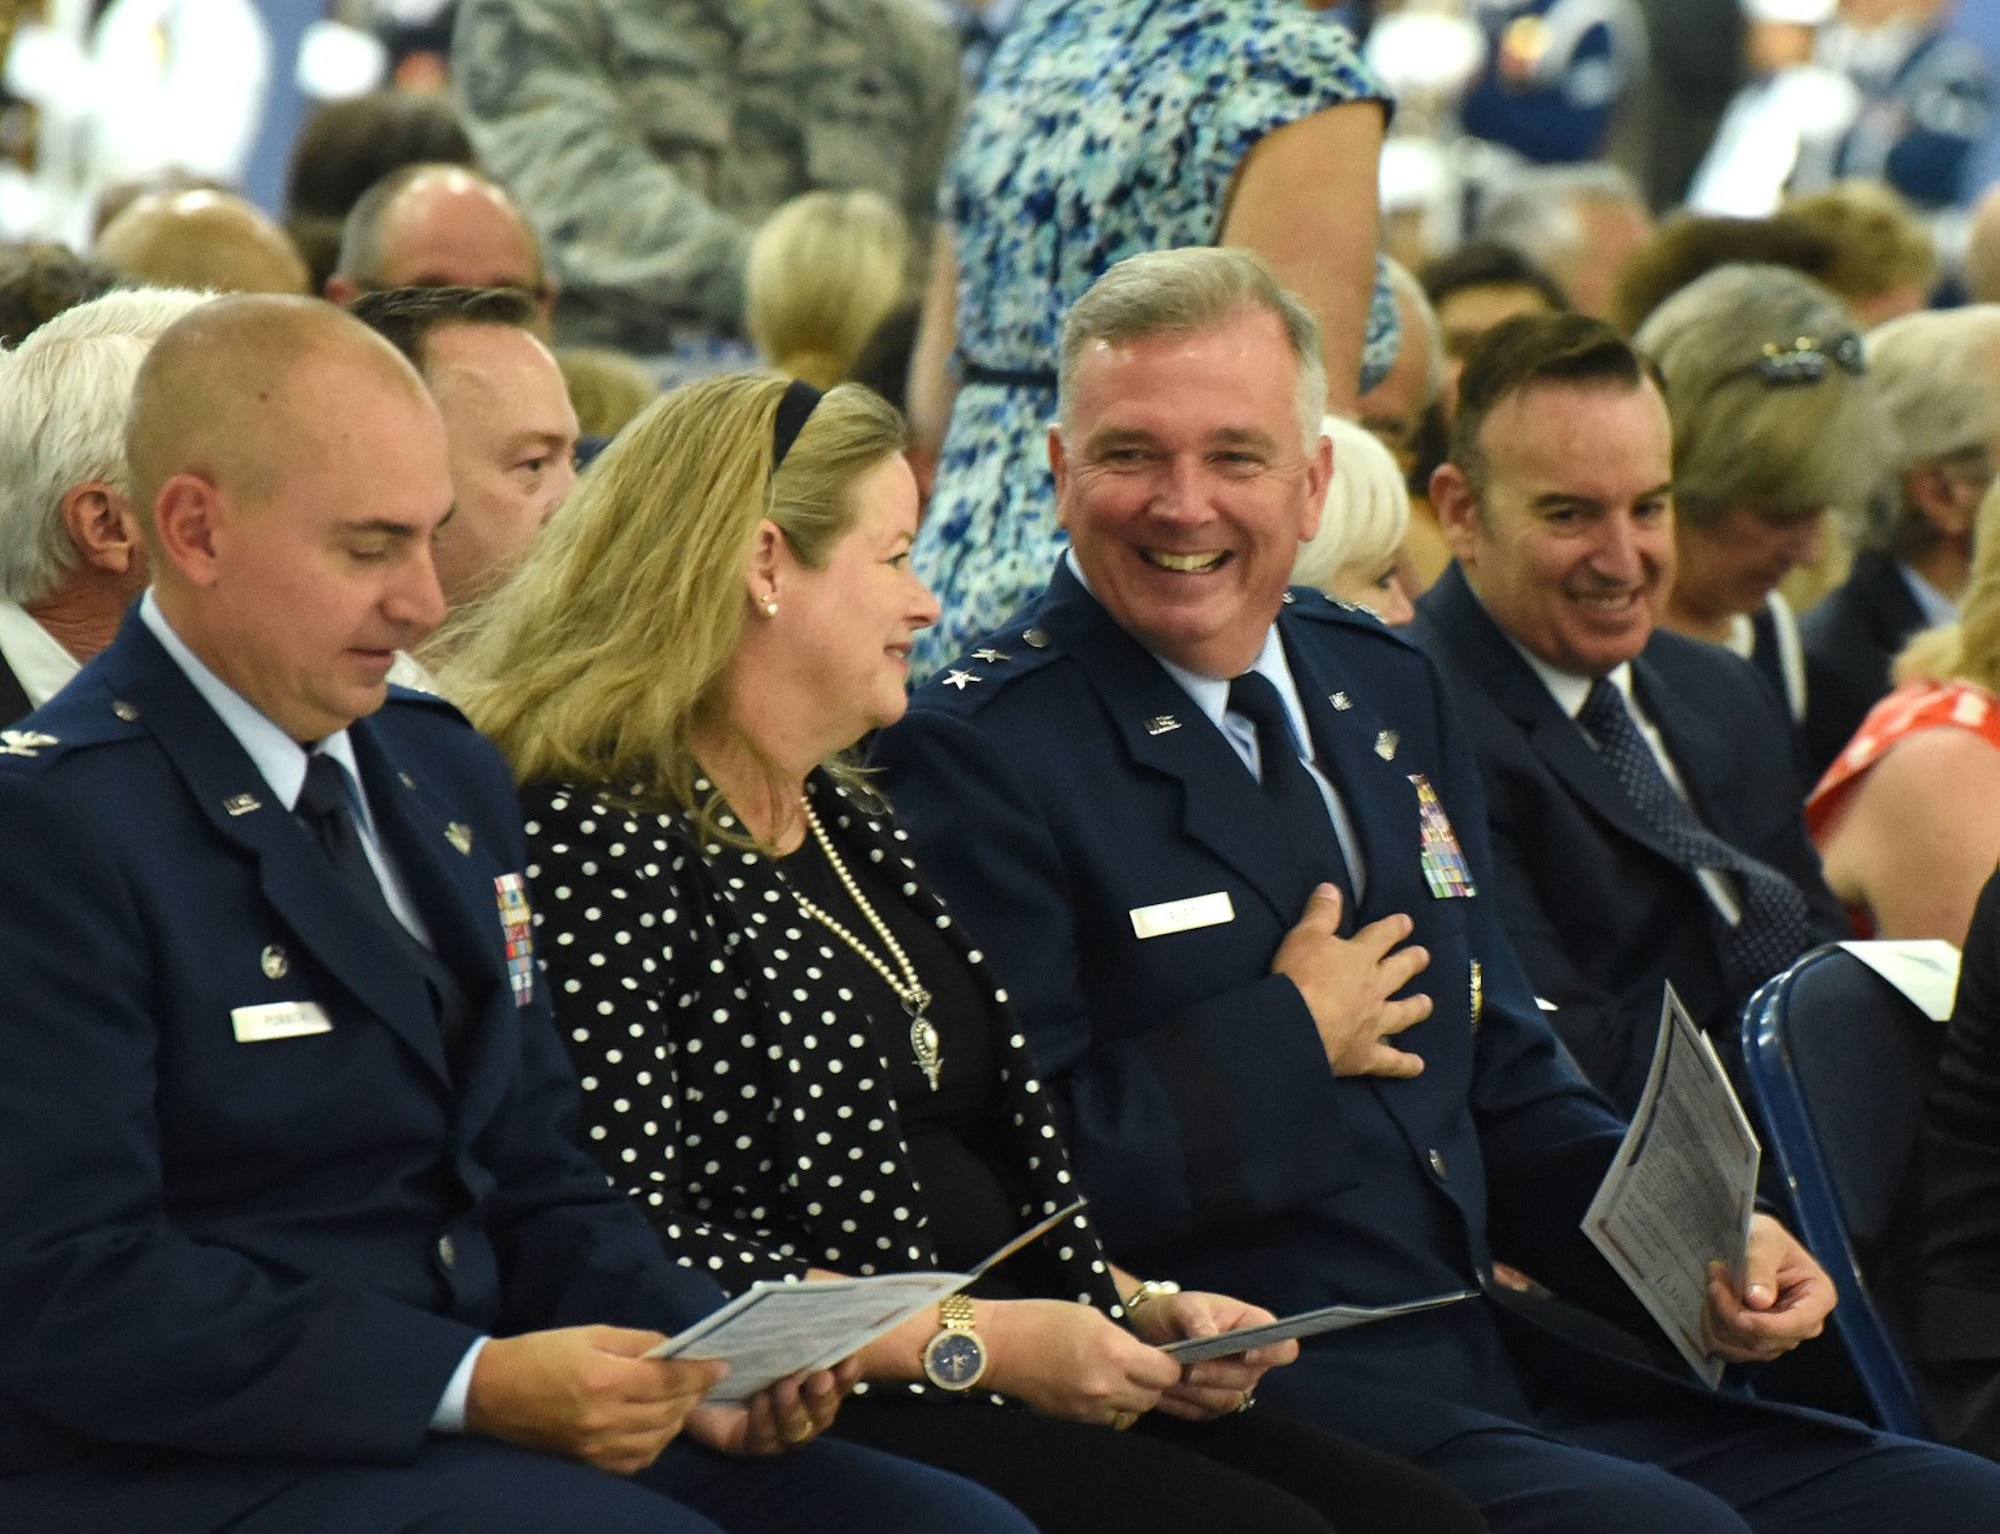 Col. Andrew M. Purath, 11th Wing and Joint Base Andrews commander, peruses a program as Charlotte Rupp and her husband, Air Force District of Washington Commander Maj. Gen. Ricky N. Rupp share a candid moment before the retirement ceremony in honor of United States Air Force Gen. Paul J. Selva, Vice Chairman of the Joint Chiefs of Staff. Selva, the 10th Vice Chairman of The Joint Staff, retires from the Air Force after more than 39 years of honorable service. (U.S. Air Force photo/Master Sgt. Amaani Lyle) — at Joint Base Andrews.